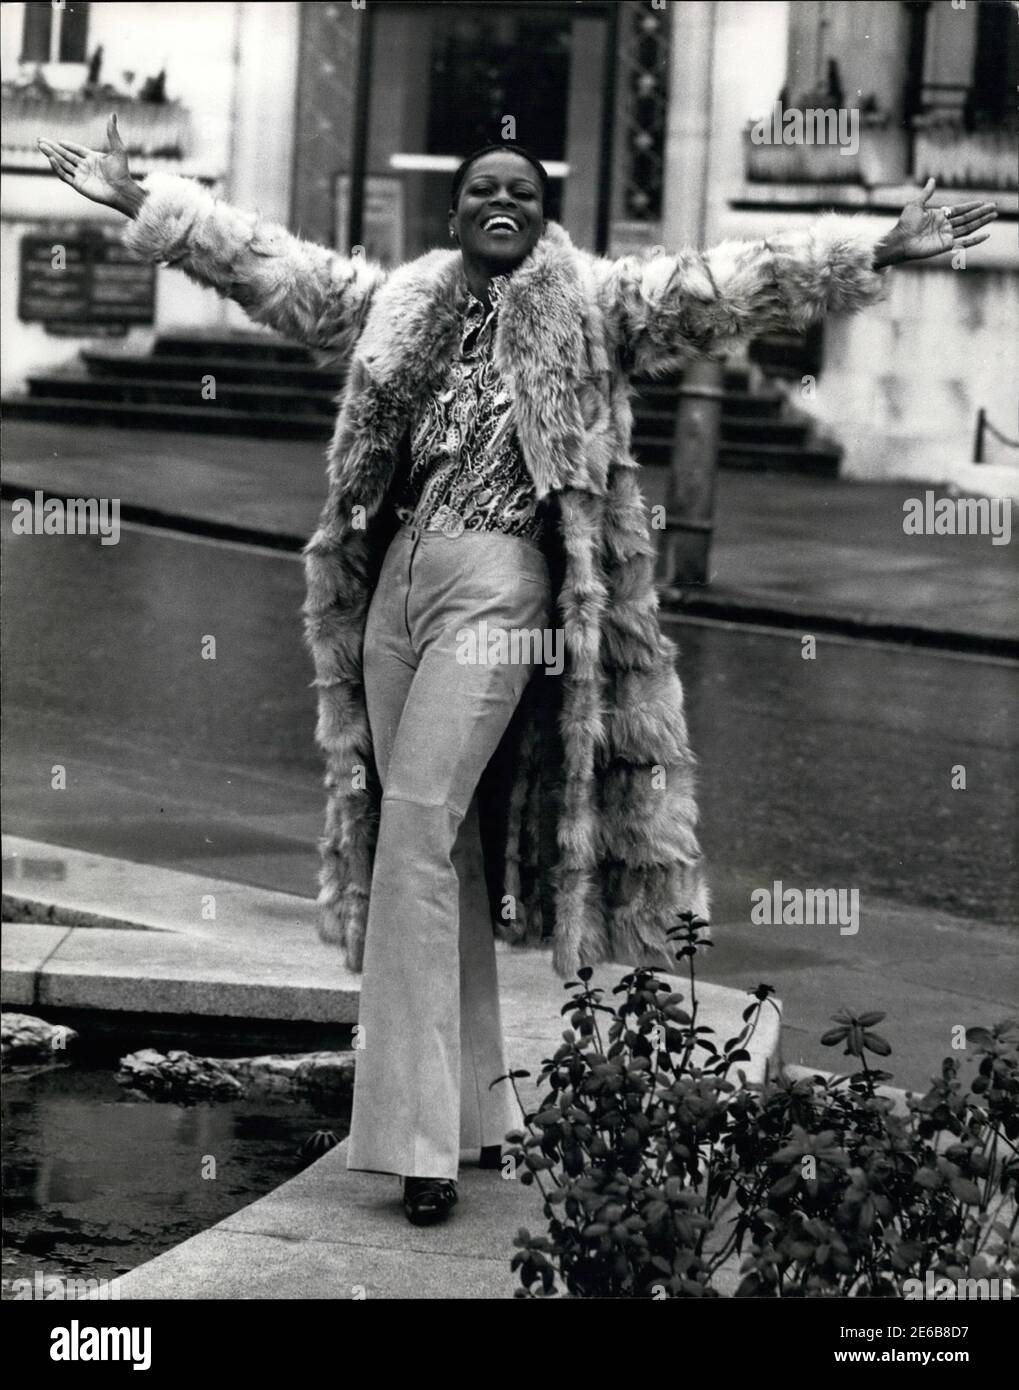 January 28, 2021: Cicely Tyson, an award-winning icon who broke barriers for Black actresses and who gained an Oscar nomination for her role as the sharecropper's wife in 'Sounder,' has died at 96. FILE PHOTO: February 2, 1973, London, England,  United Kingdom: CICELY TYSON pictured during an outing in the West End. Tyson, one of America's most distinguished actresses, who is hotly tipped to win this year's ''Best Actress' Academy Award, for her role in the 20th Century-Fox presentation ''Sounder'', has arrived in London. (Credit Image: © Keystone Press Agency/Keystone USA via ZUMAPRESS.com) Stock Photo